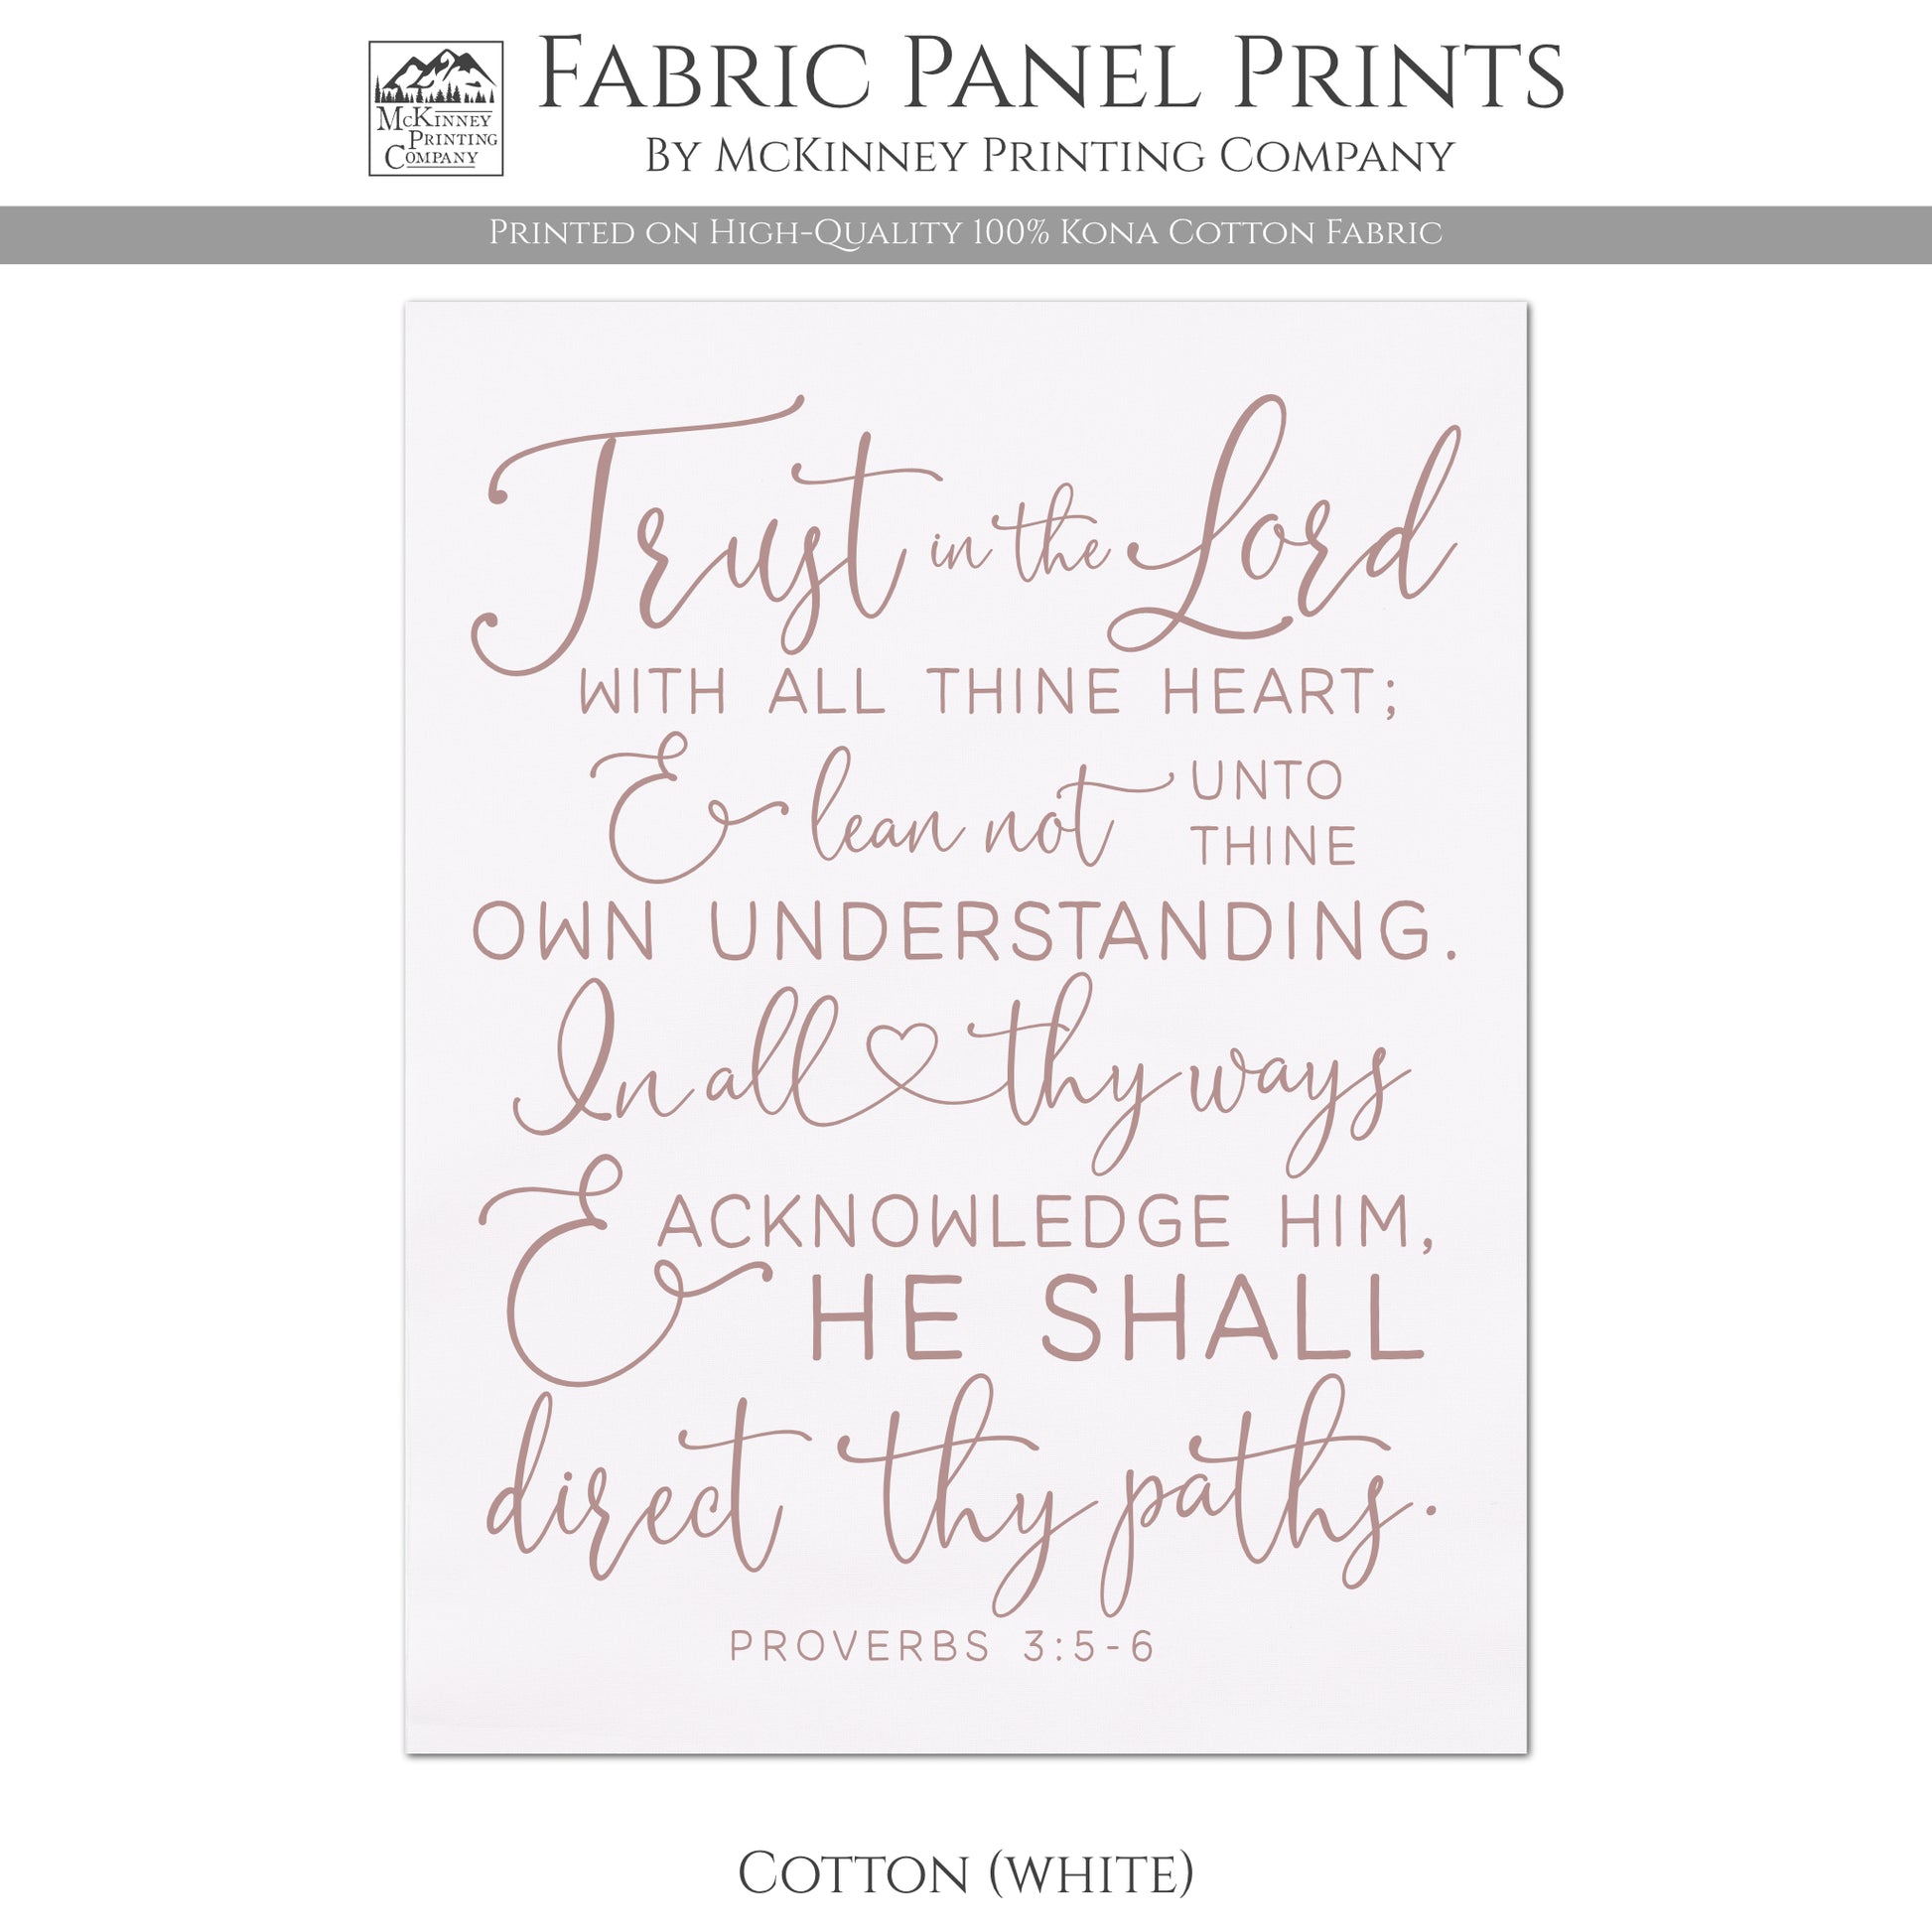 Trust in the Lord with all thine heart; and lean not unto thine own understanding. In all thy ways and acknowledge Him and He shall direct they paths. - Proverbs 3:5 - 6 - Cotton, White